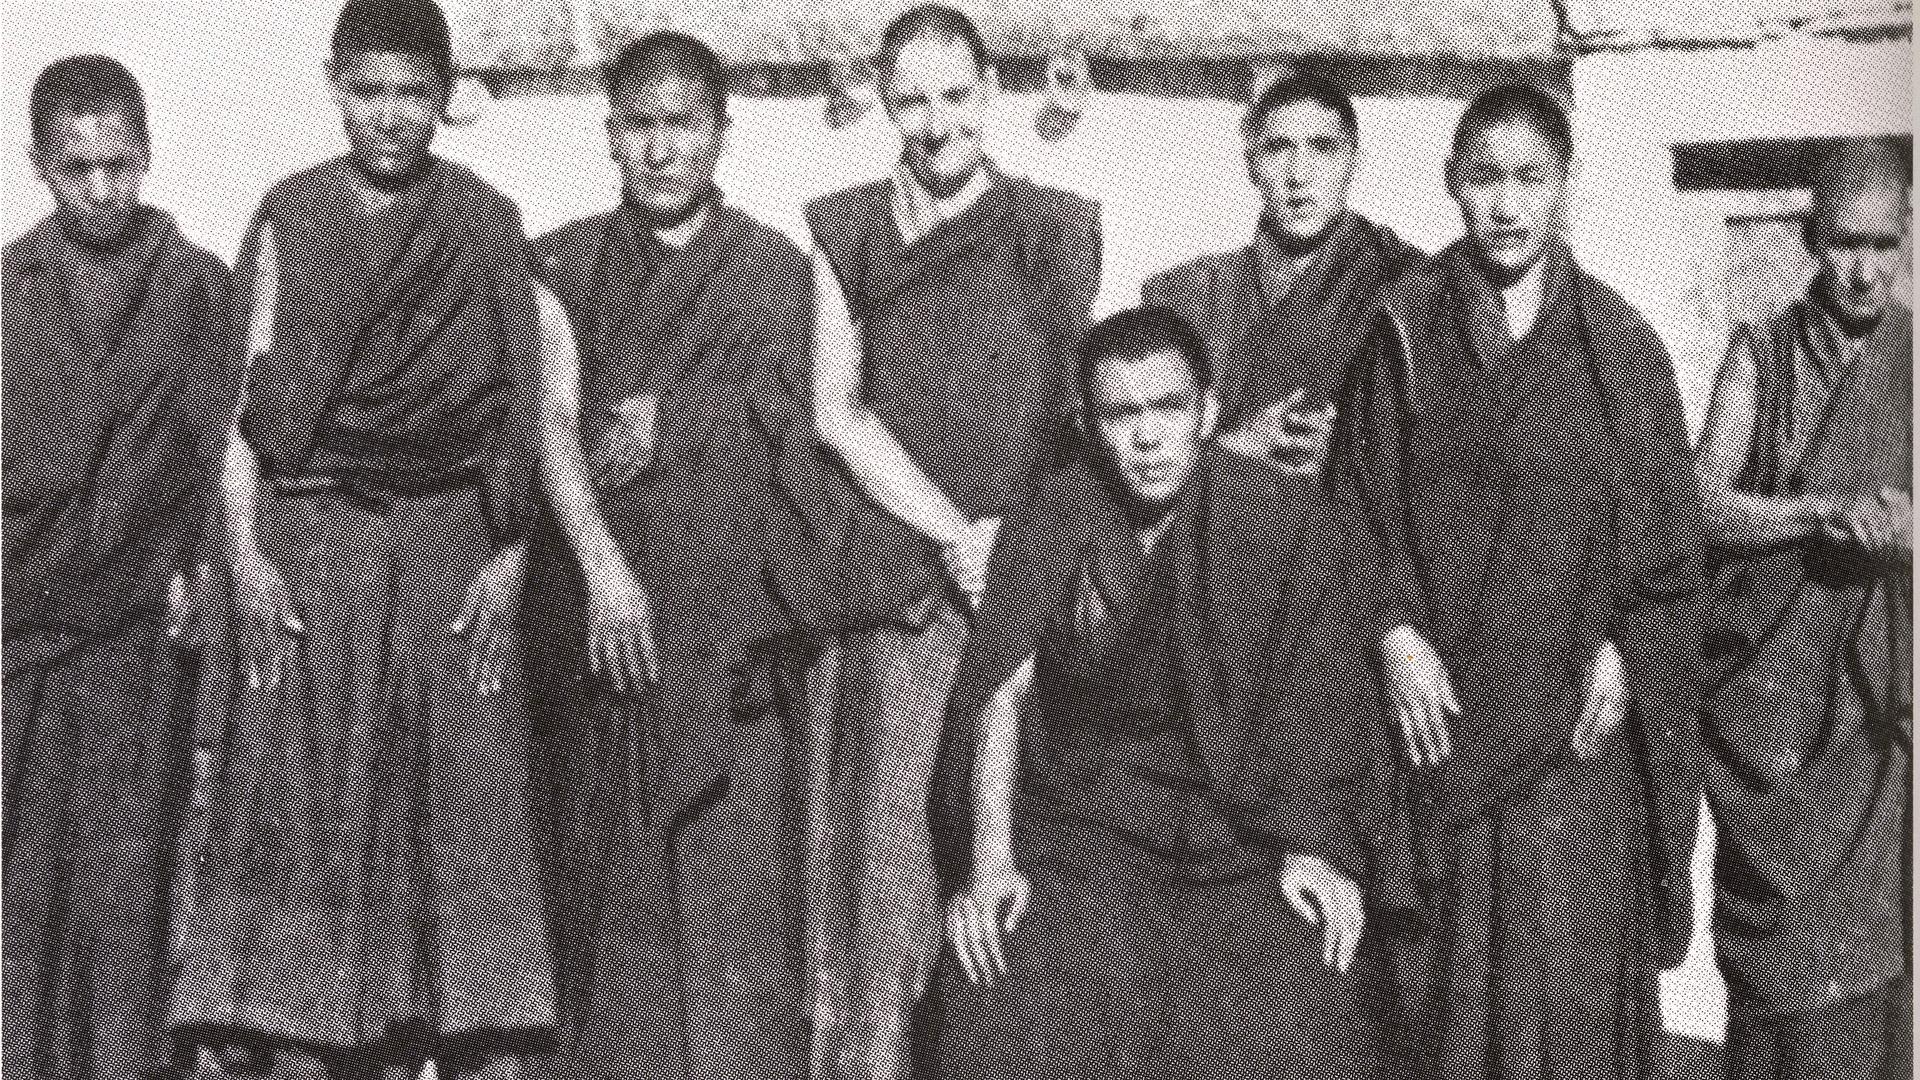 Lobzang Jivaka (fourth from left) at Rizong Monastery in Ladakh, northern India, with some of his fellow monks, in 1960.